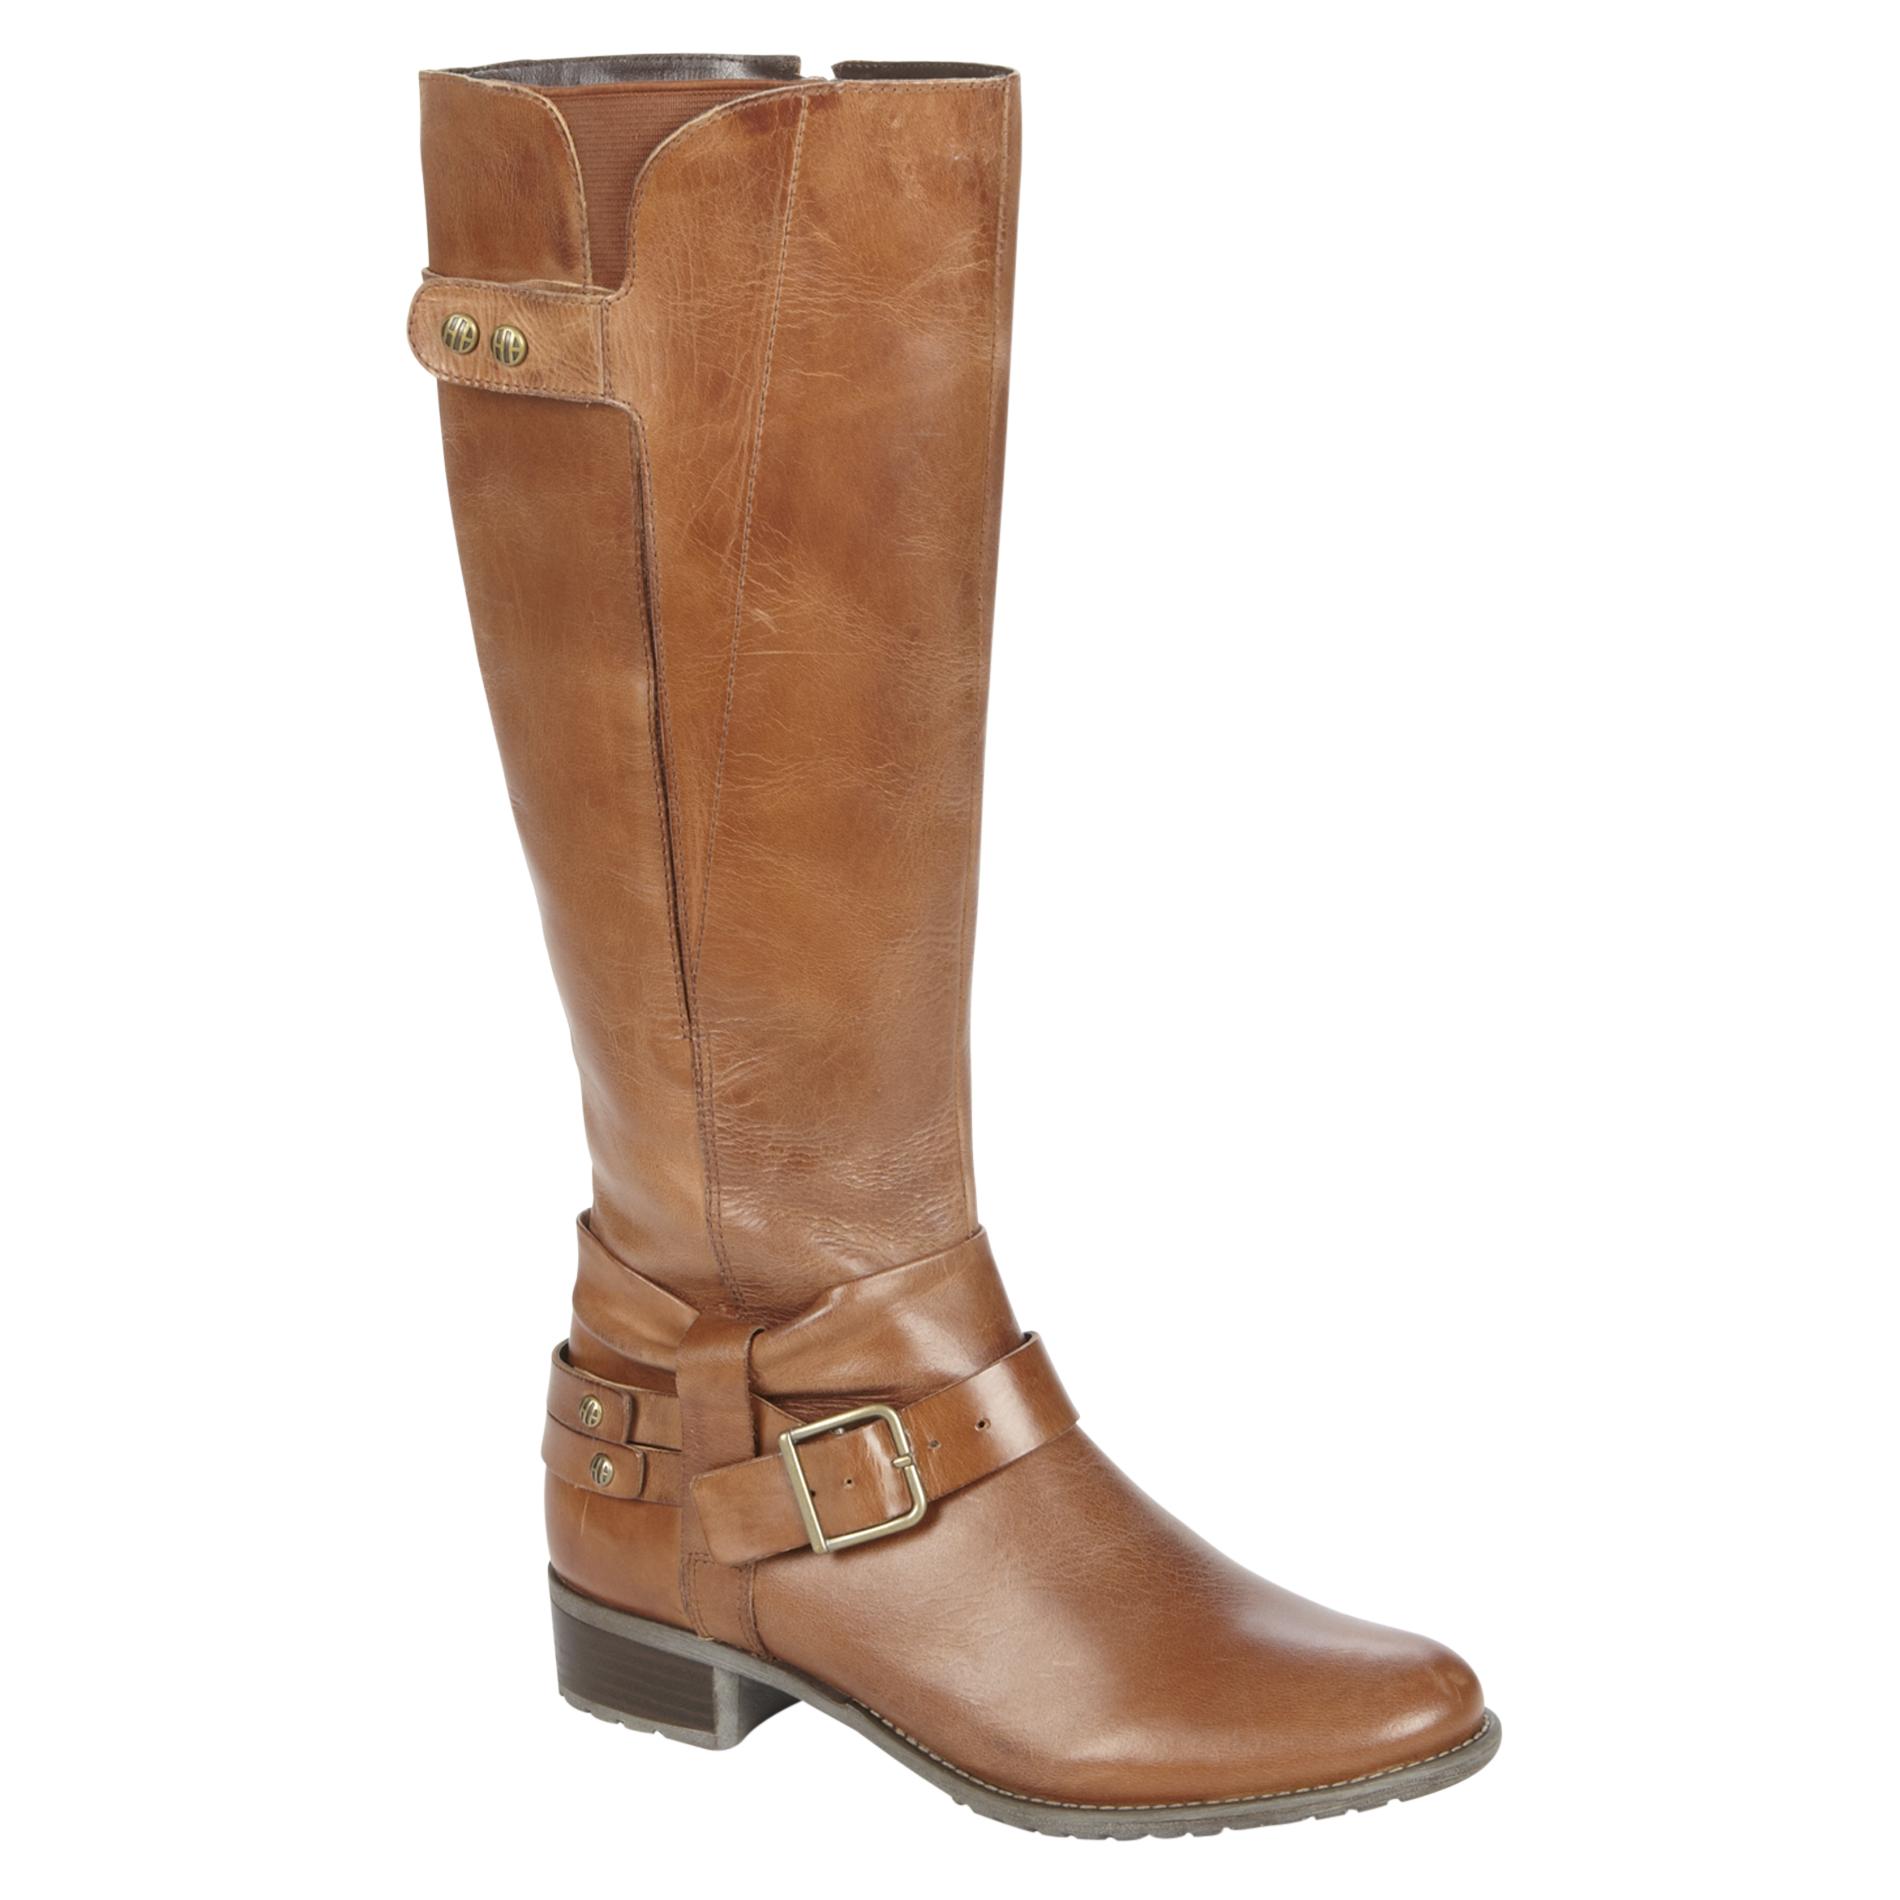 Joes Jeans Women's Tall Weather Boot Chamber - Tan